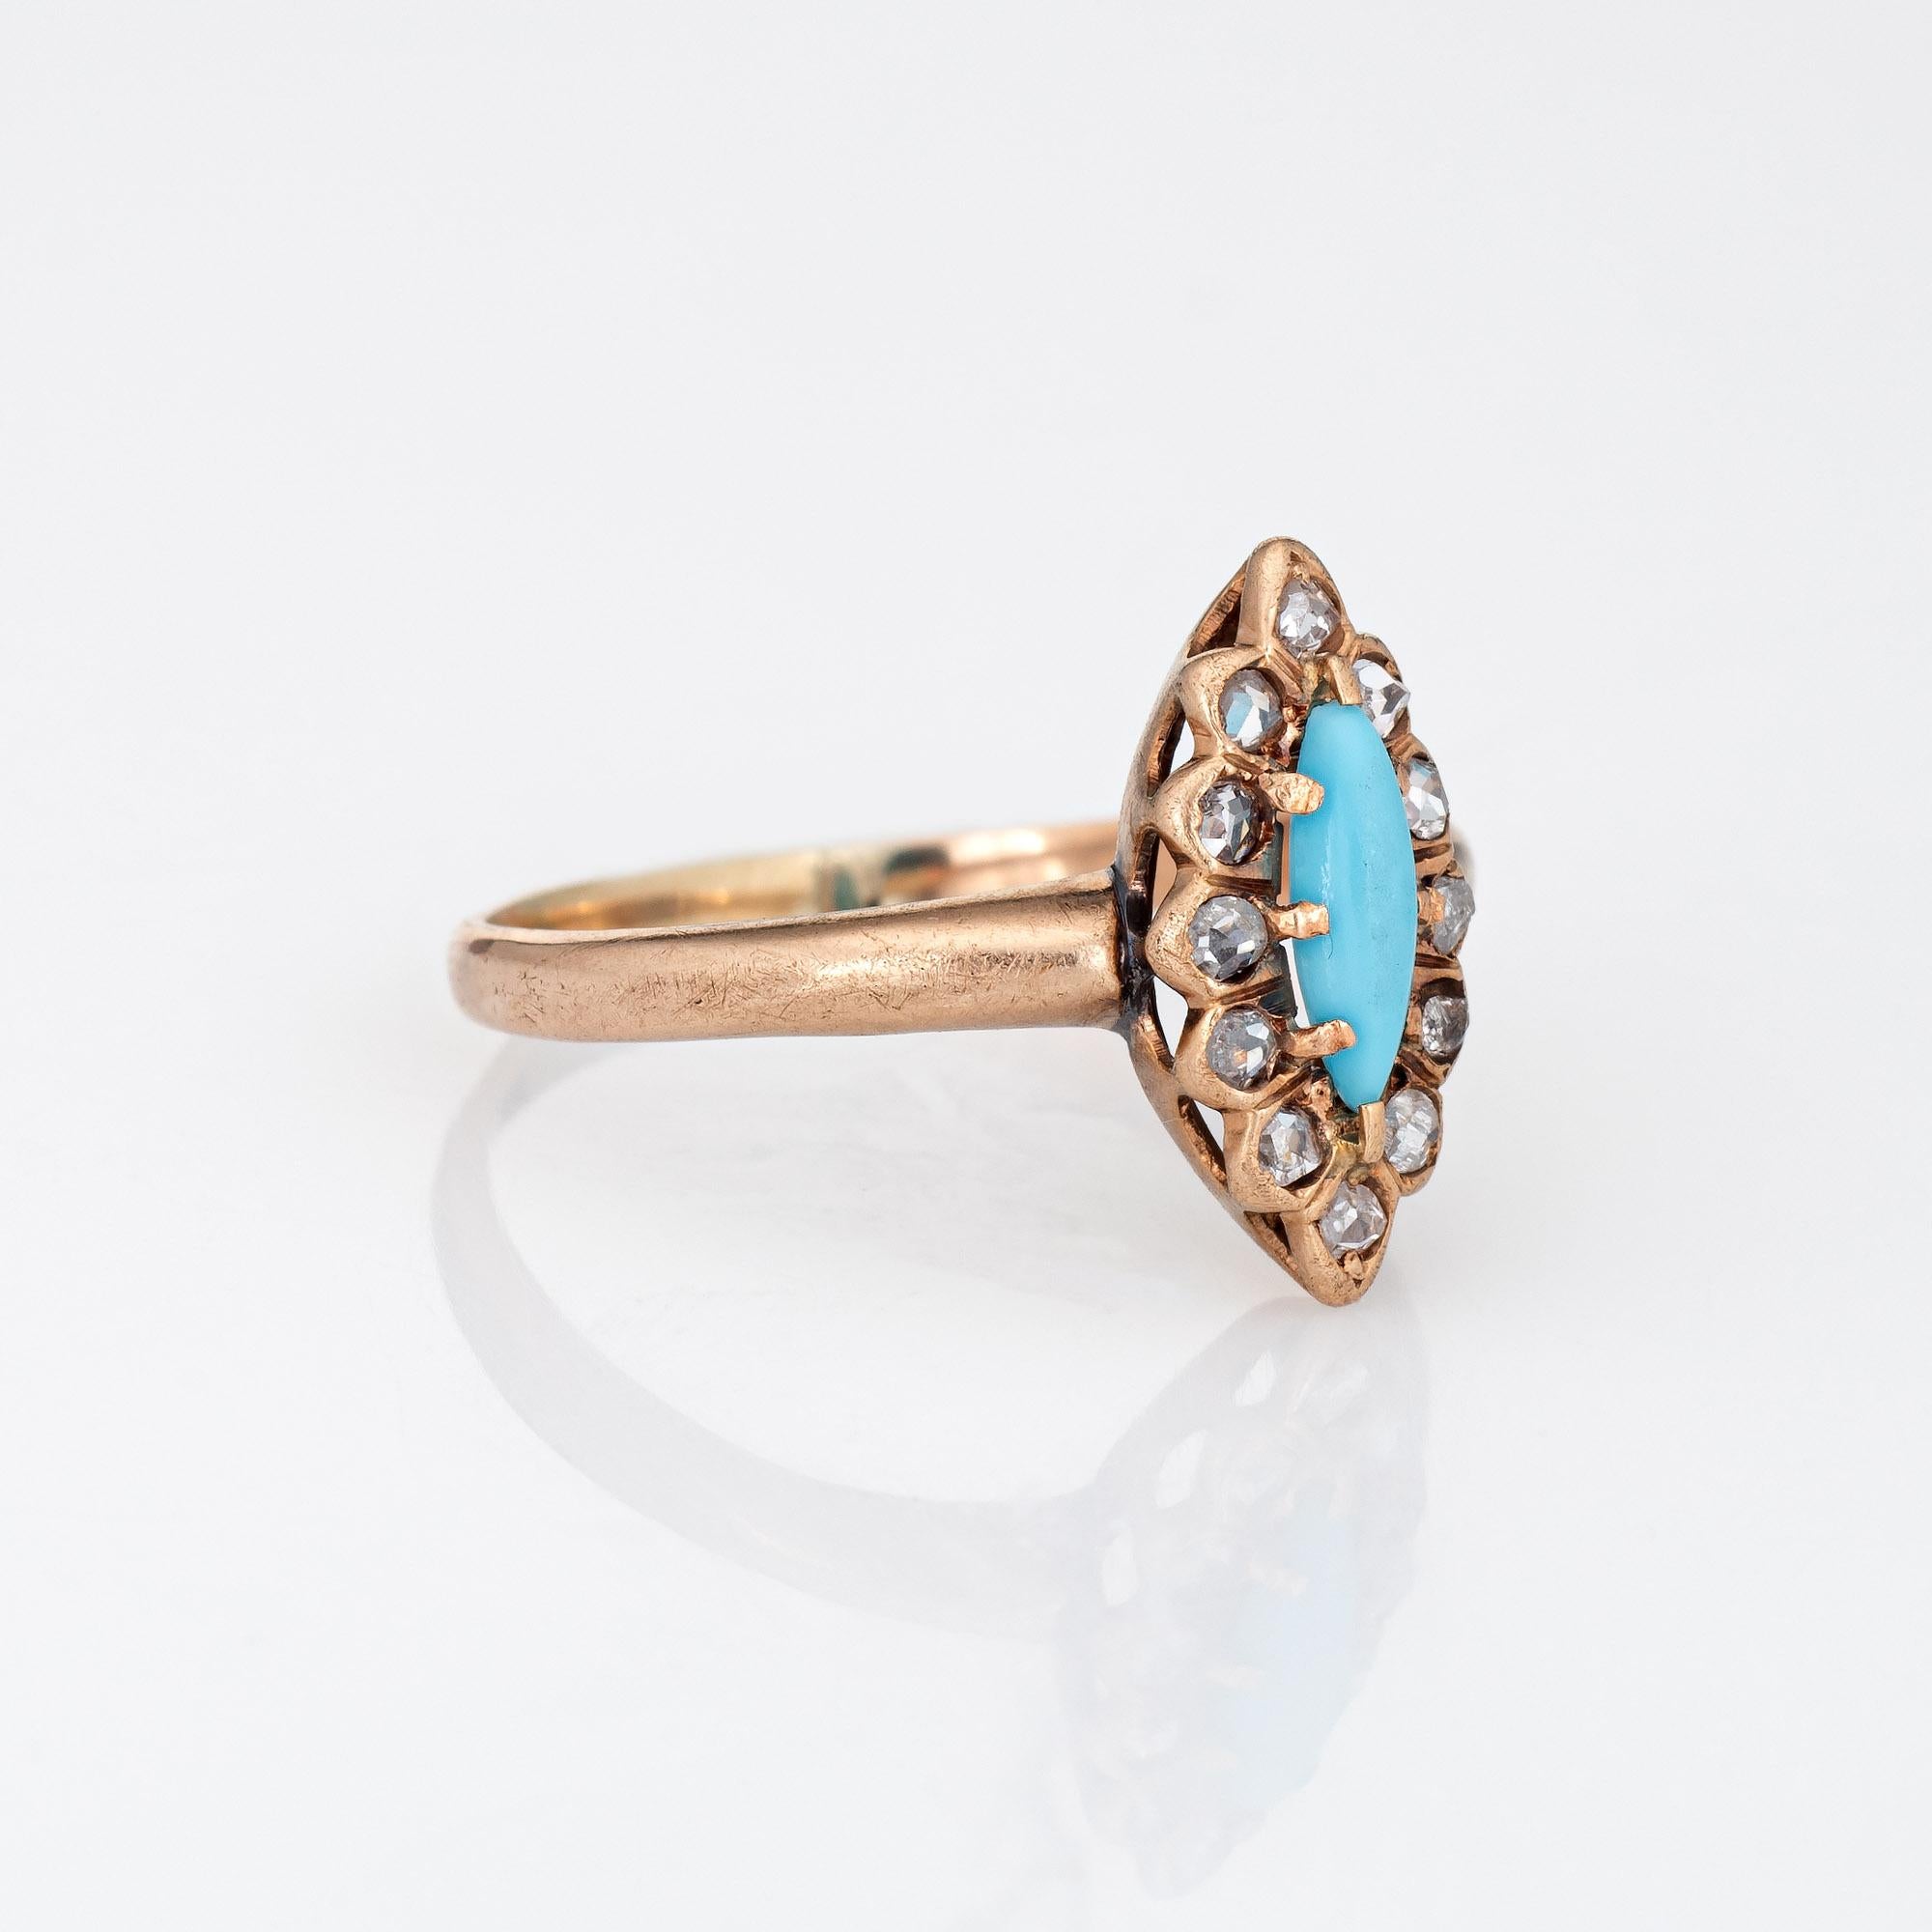 Antique Victorian Navette Ring Old Rose Cut Diamond Turquoise 14k Gold Vintage In Good Condition For Sale In Torrance, CA